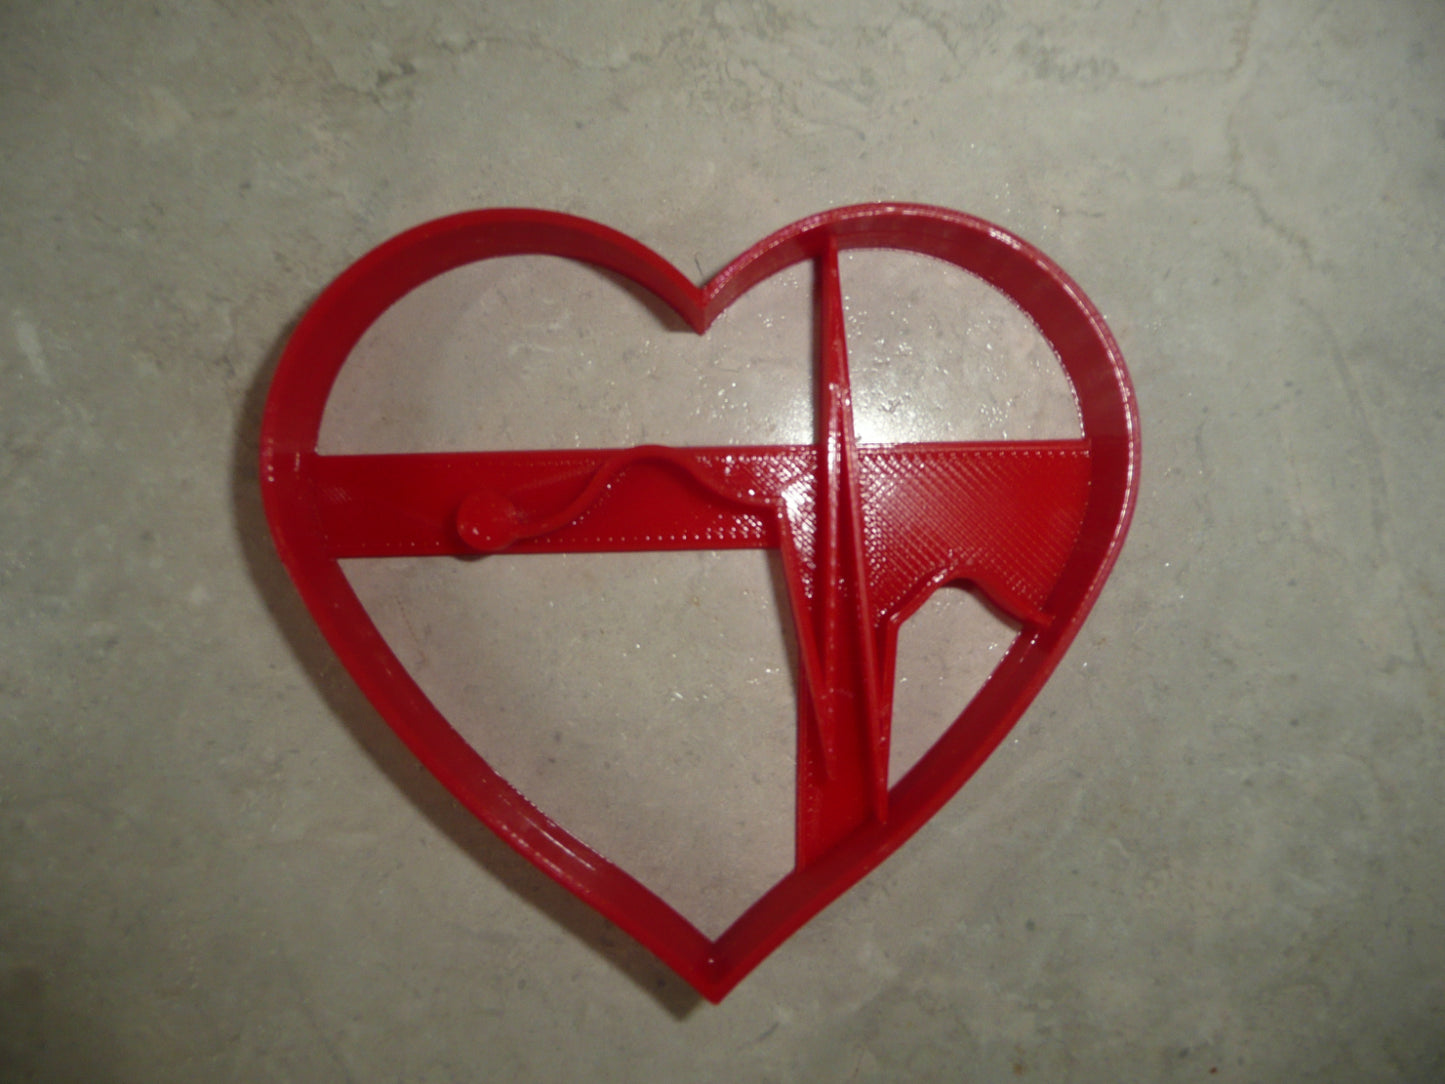 6x Heart with Heartbeat Fondant Cutter Cupcake Topper 1.75 IN USA FD4924